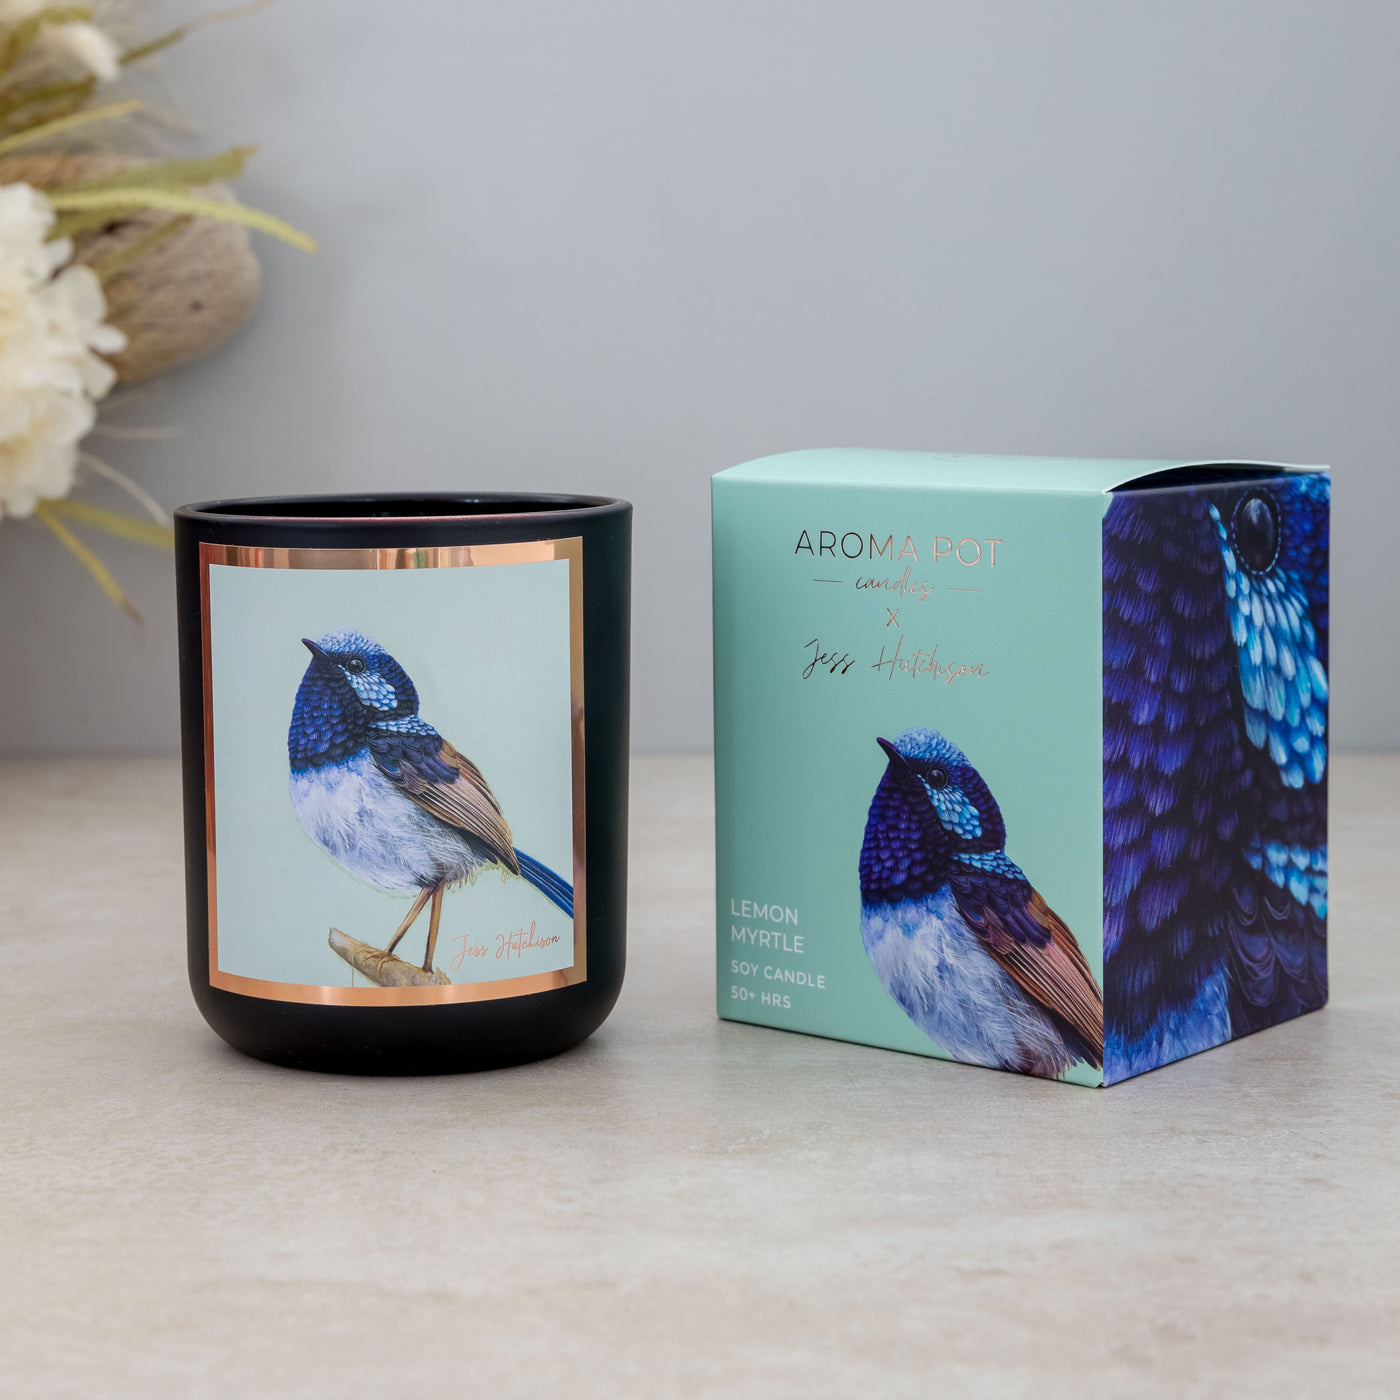 Australian artist KOOKABURRA cup and candle gift pack - choose your own candle